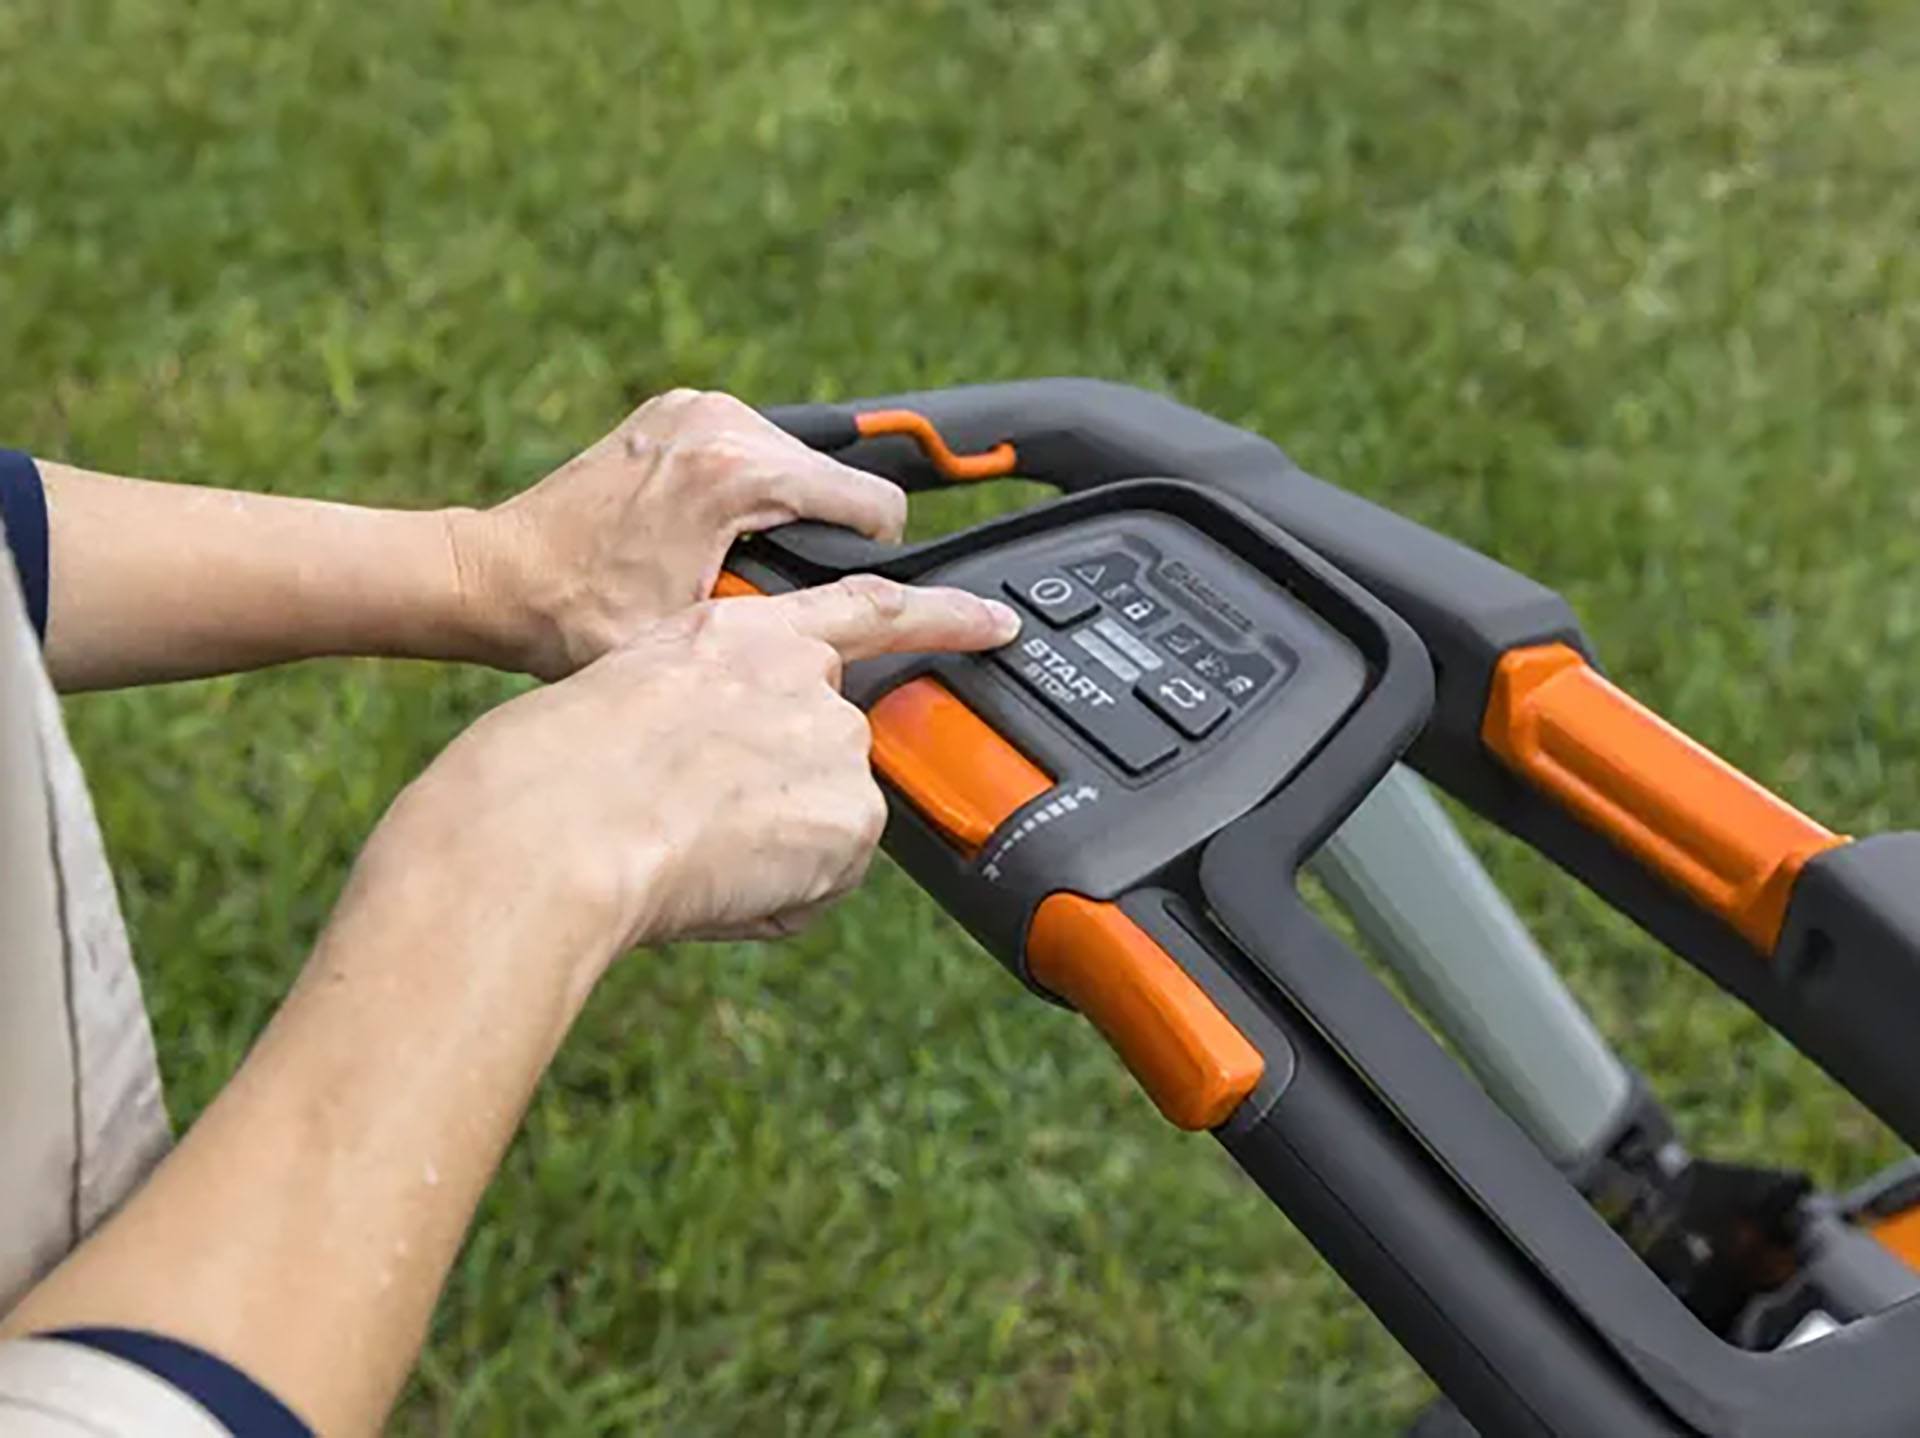 Husqvarna Power Equipment Lawn Xpert 21 in. LE-322 (tool only) in Chester, Vermont - Photo 9